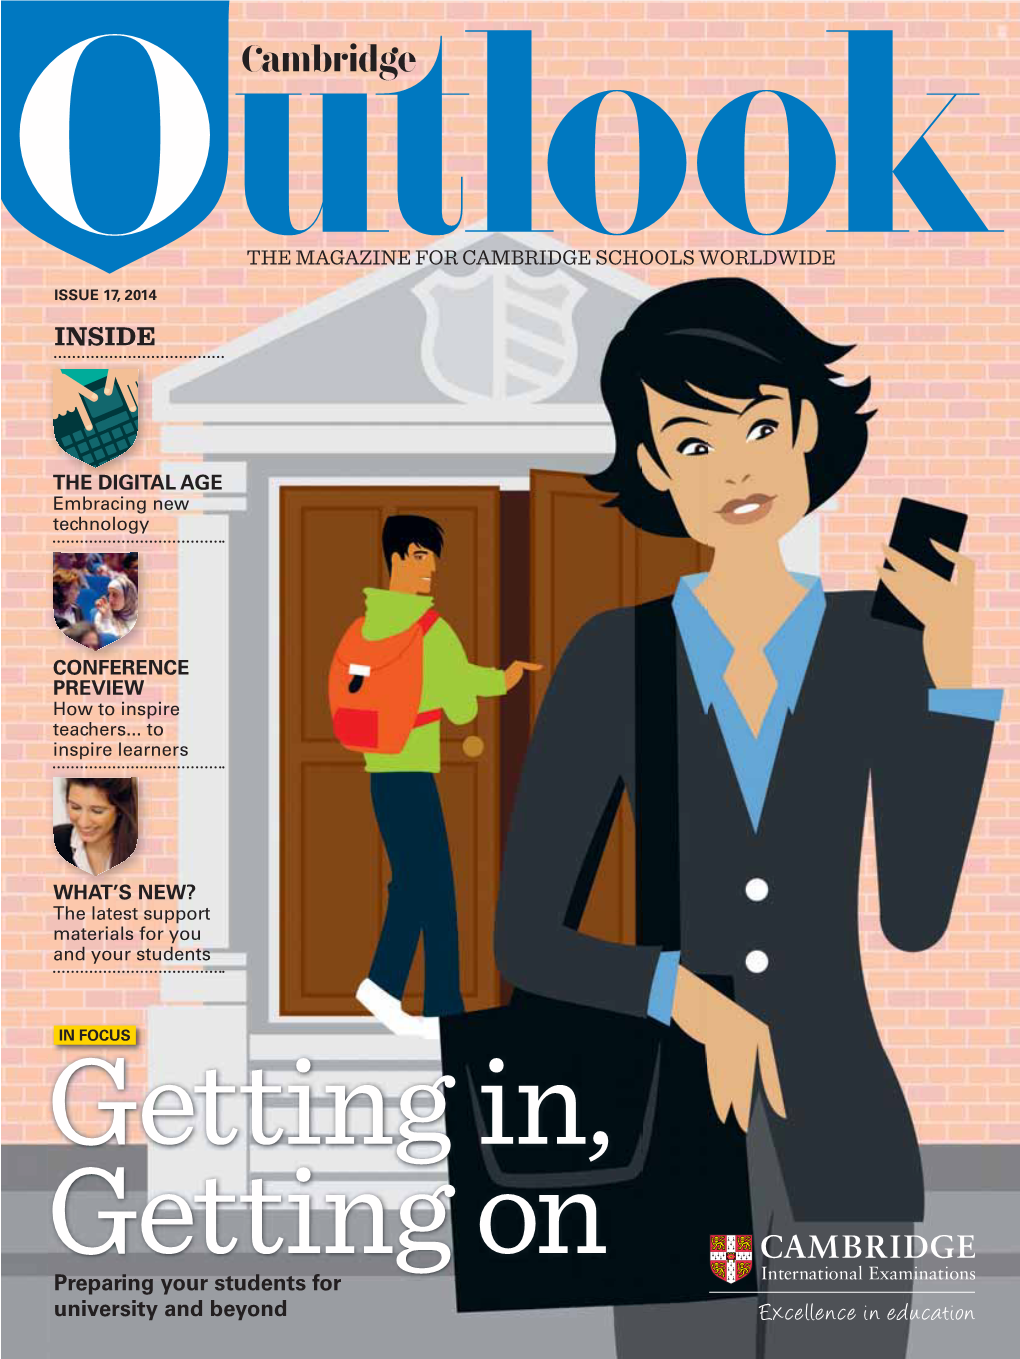 Cambridge Outlook Will Have a Theme